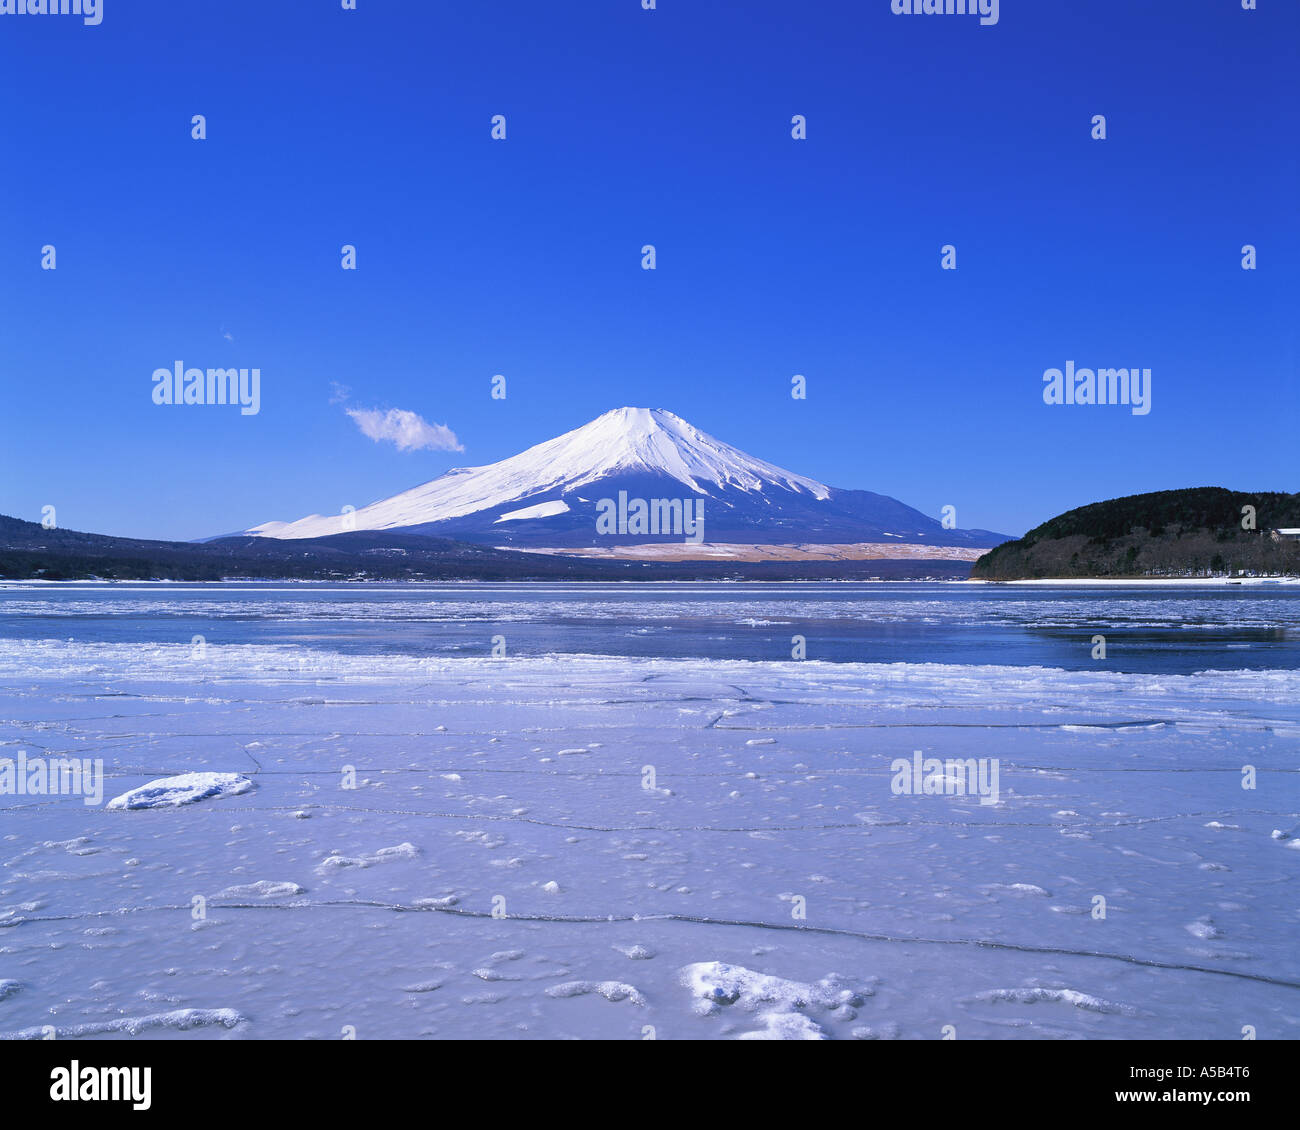 Frozen lake in front of Mt Fuji Stock Photo